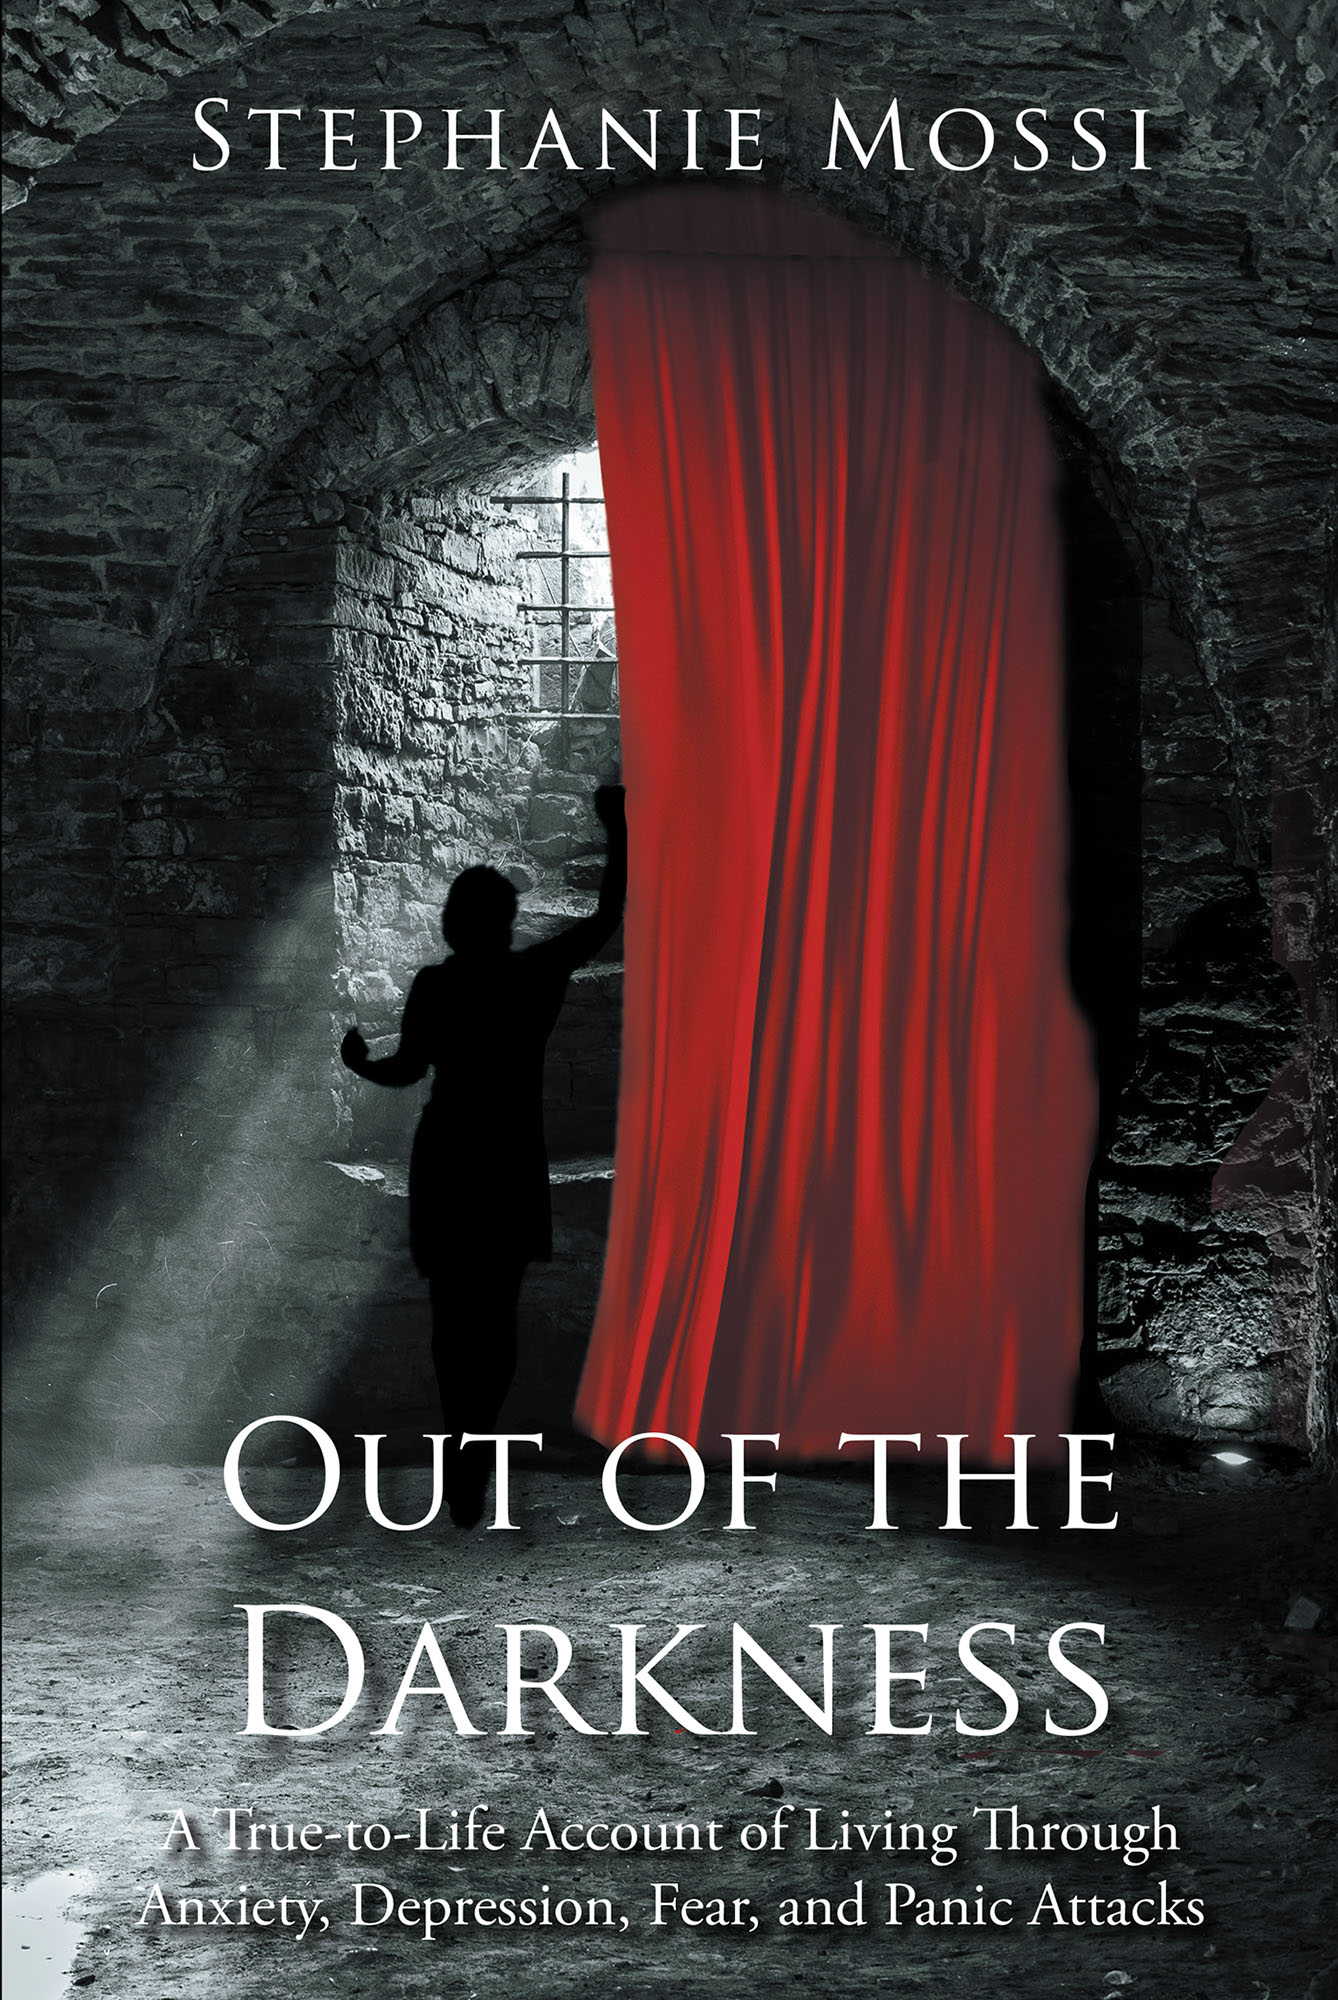 Valerie Fillmore’s Newly Released "Out of the Darkness" is an Inspiring and Transformative Journey Through Challenging Mental Health Struggles